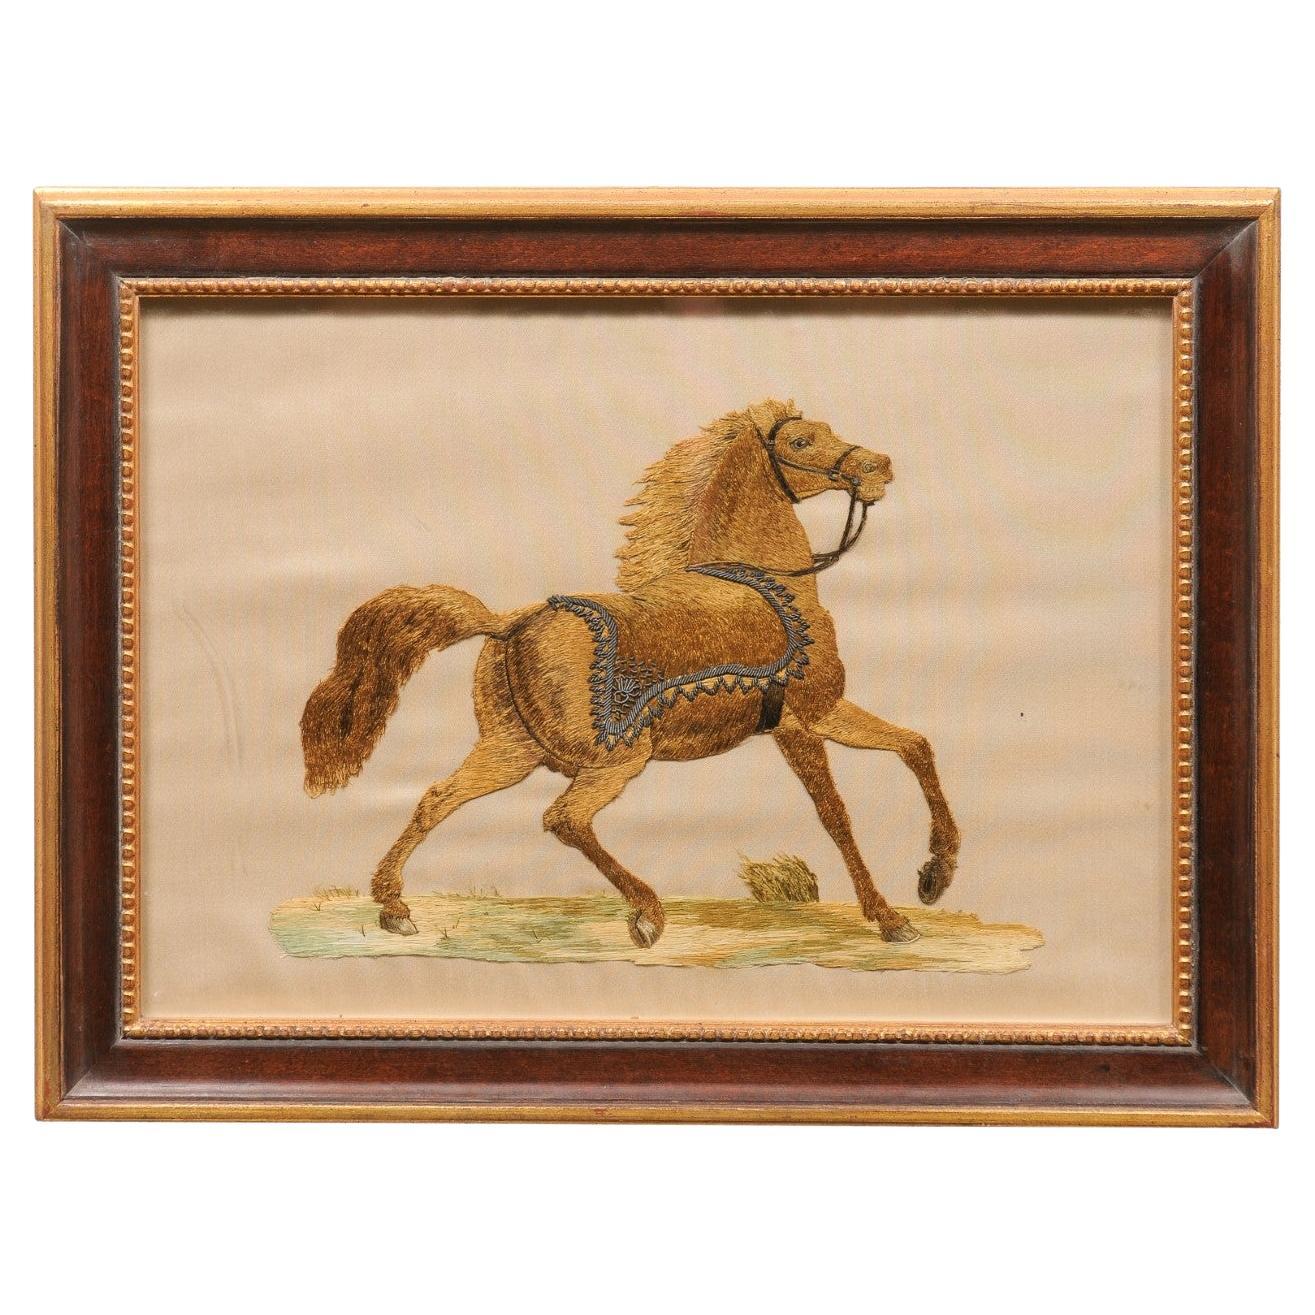 Framed 19th Century Silk Embroidery of Horse